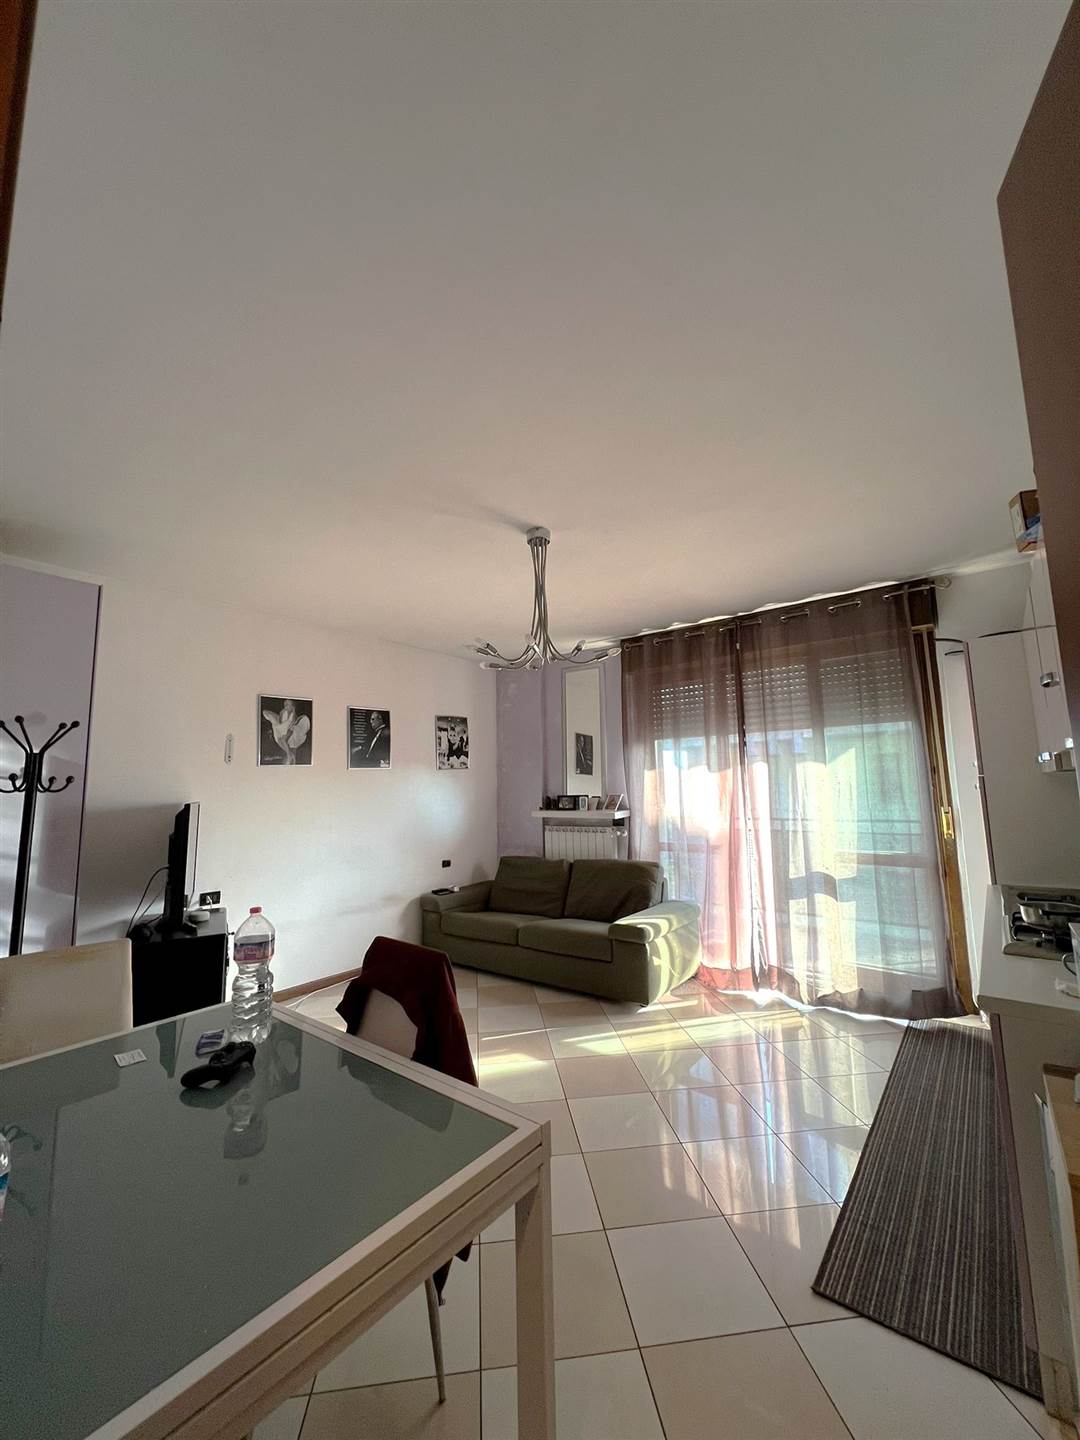 OSIO SOTTO, Apartment for sale of 40 Sq. mt., Good condition, Heating Individual heating system, Energetic class: B, placed at 2° on 3, composed by: 